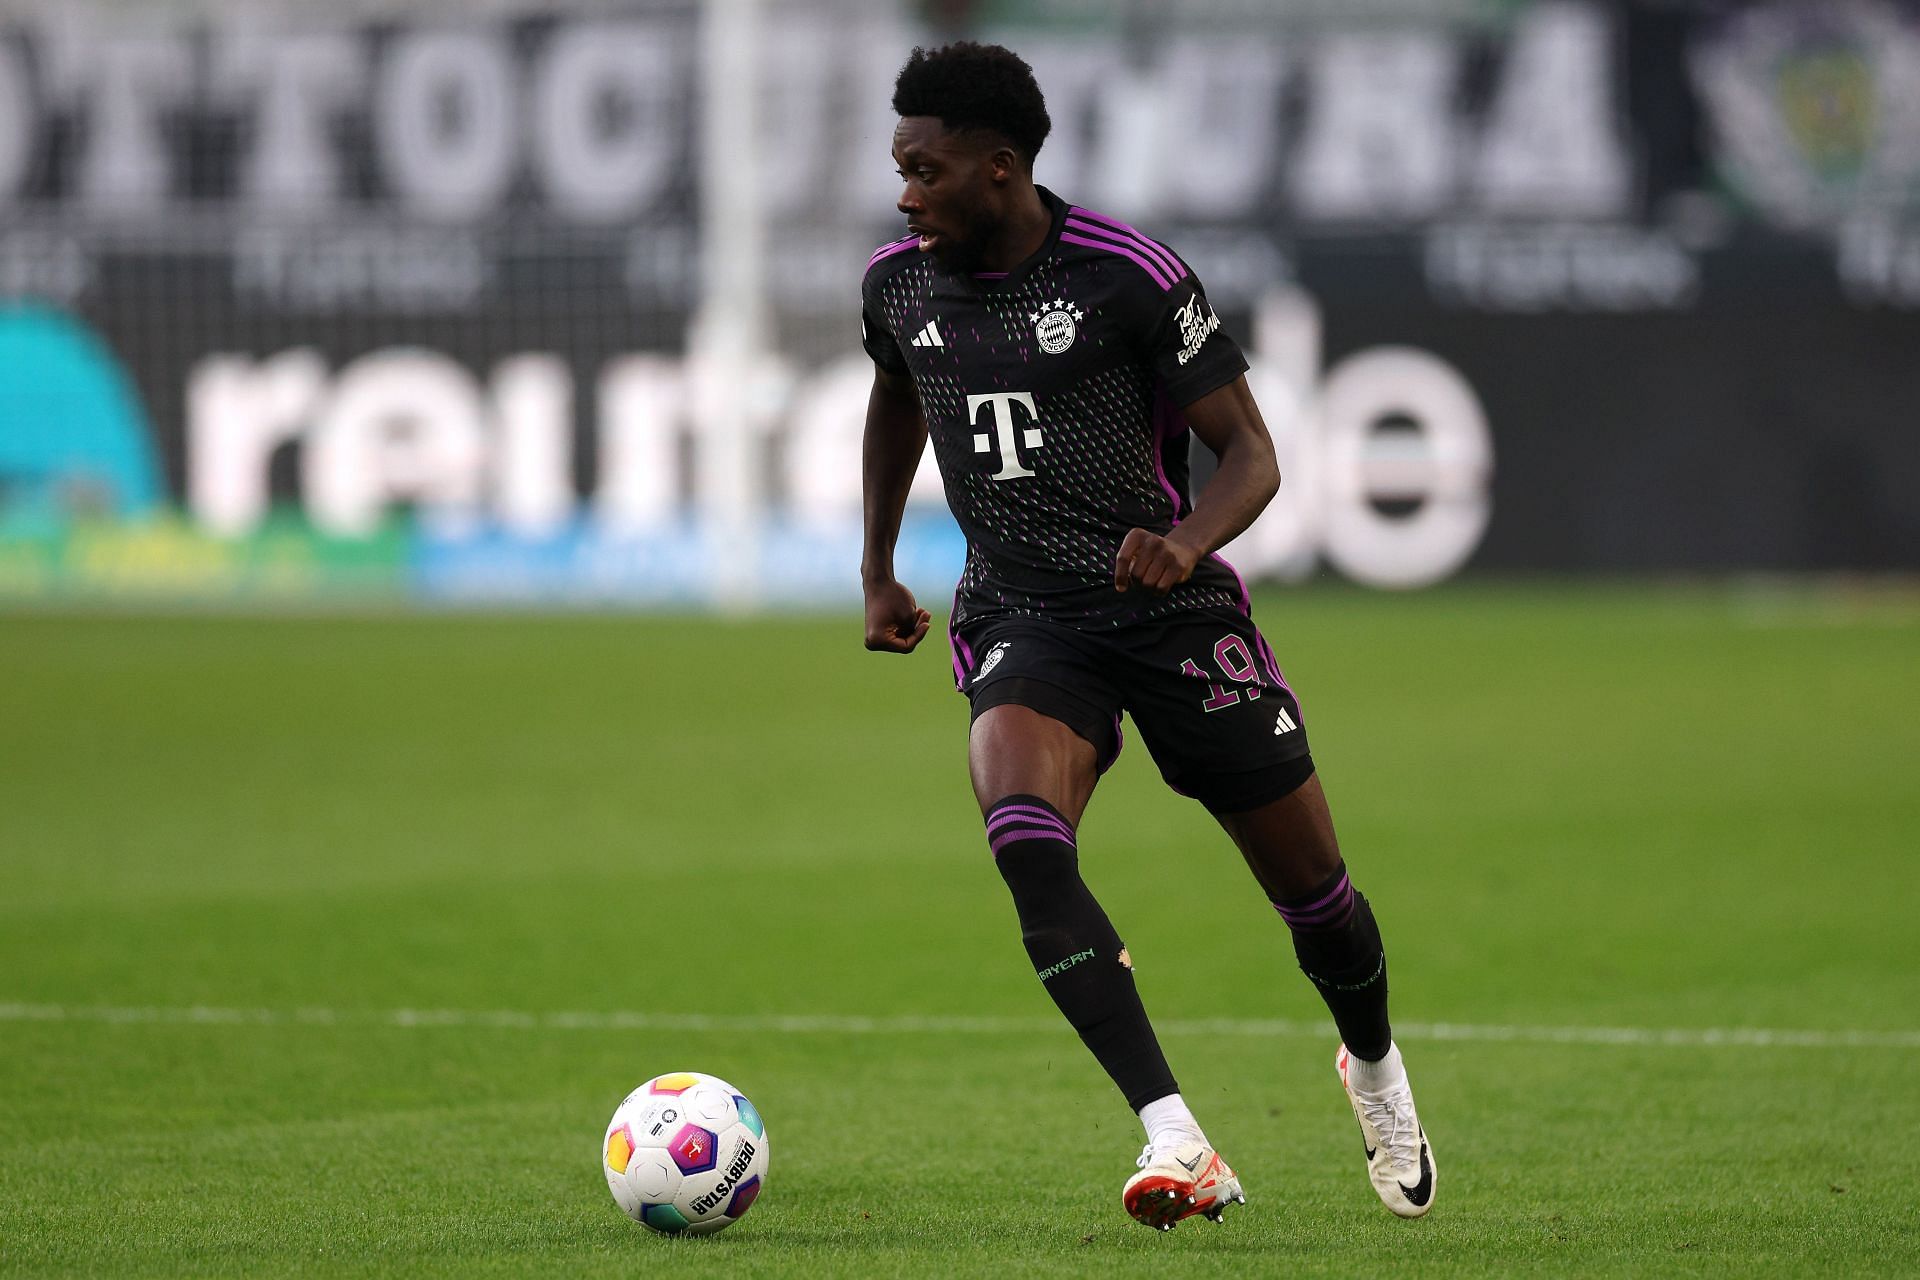 Alphonso Davies in action (via Getty Images)